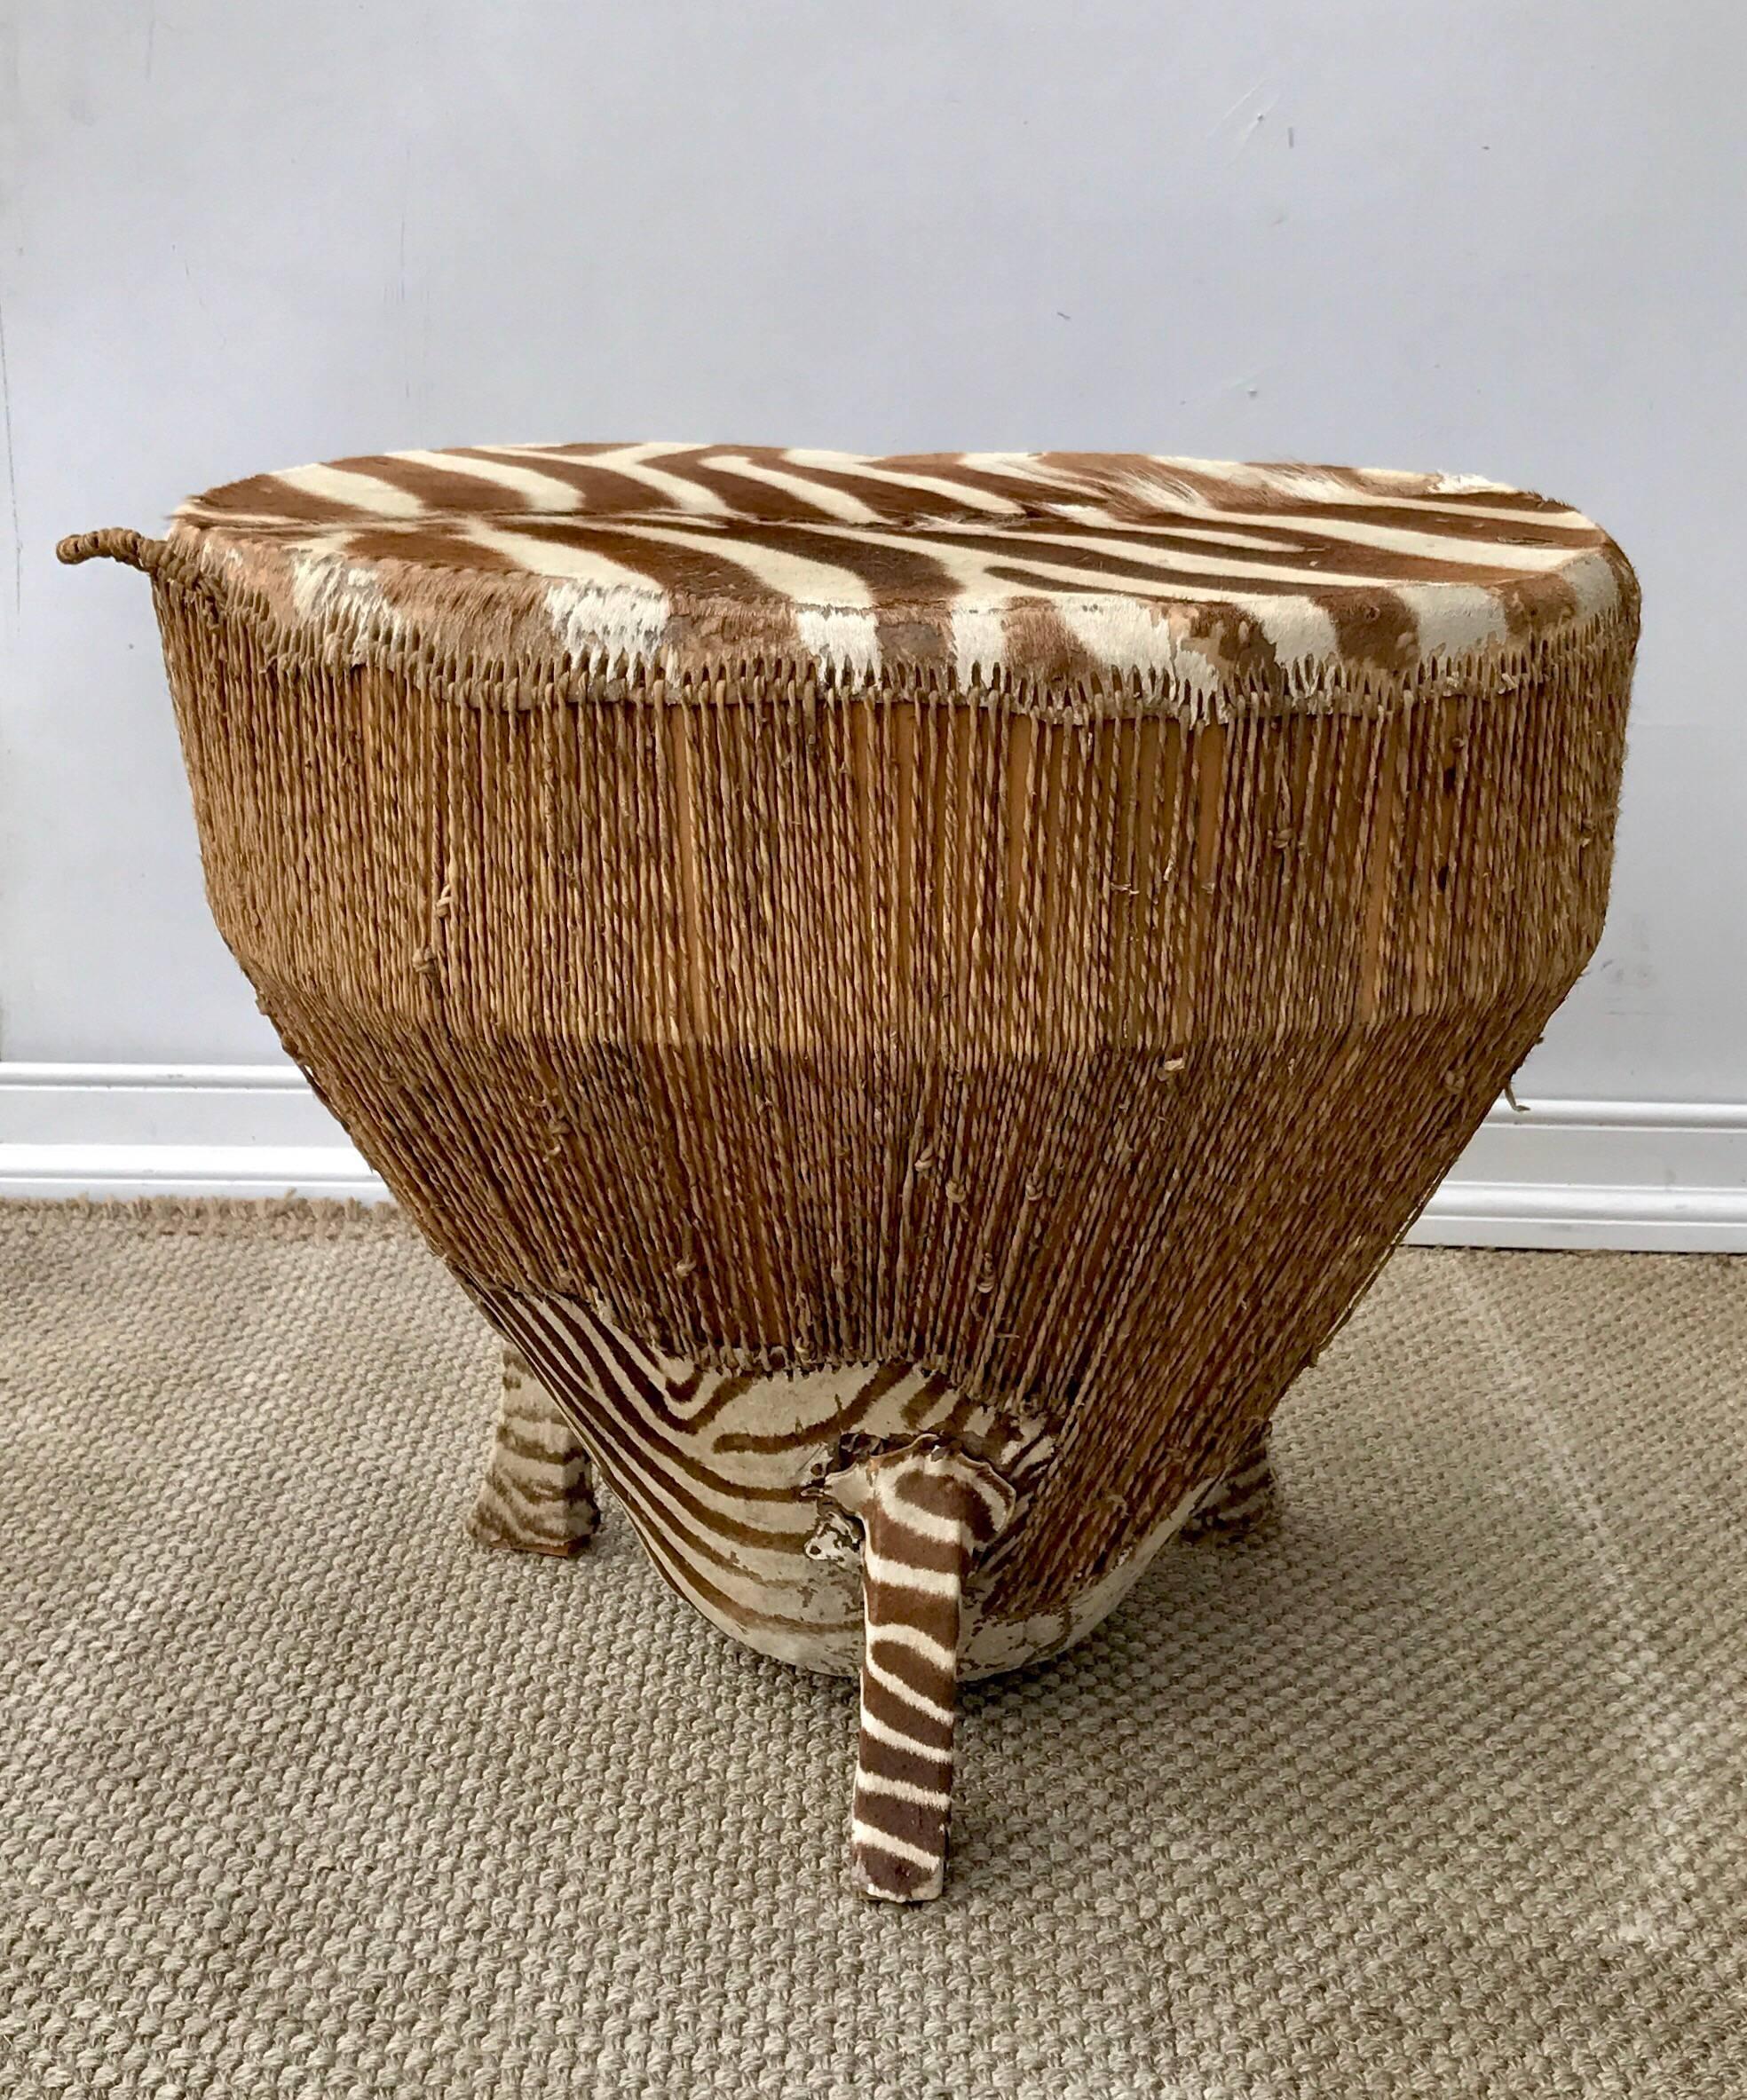 Hand-Knotted Zebra Hide Side Table in the Bohemian Chic Taste